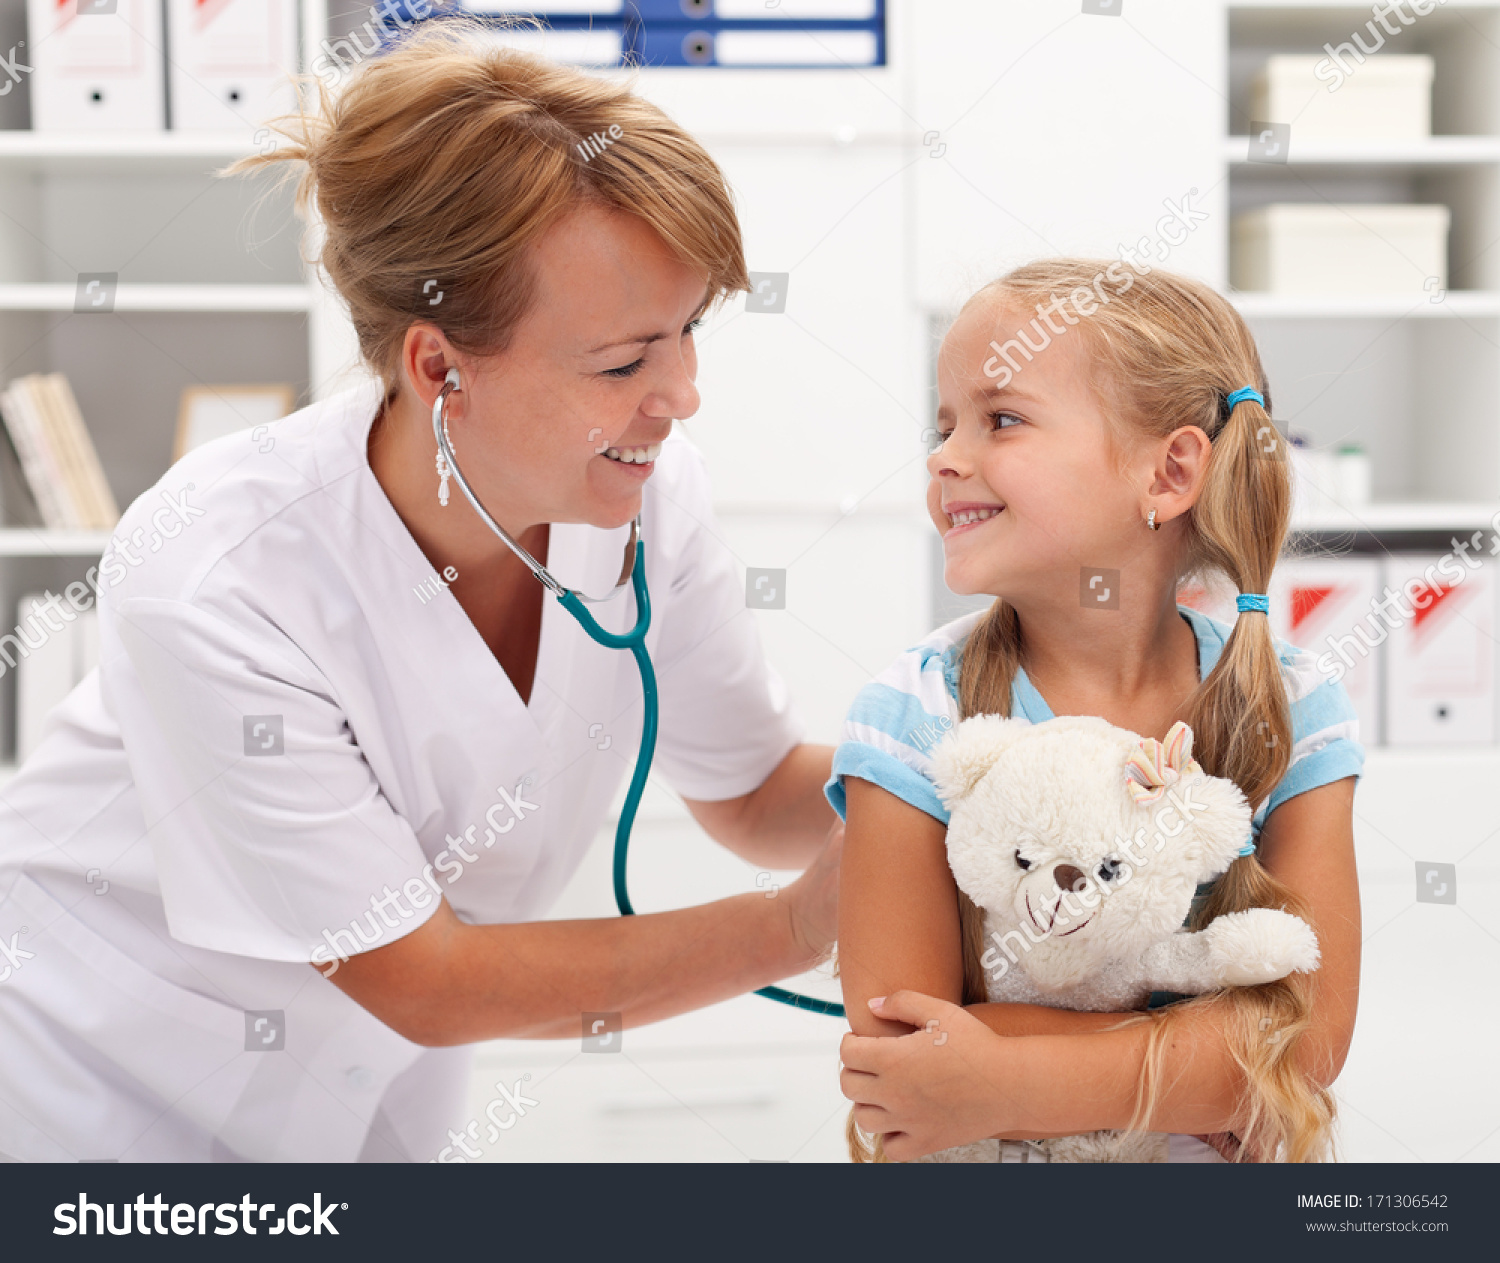 Little Girl At The Doctor For A Checkup Examination Stock 